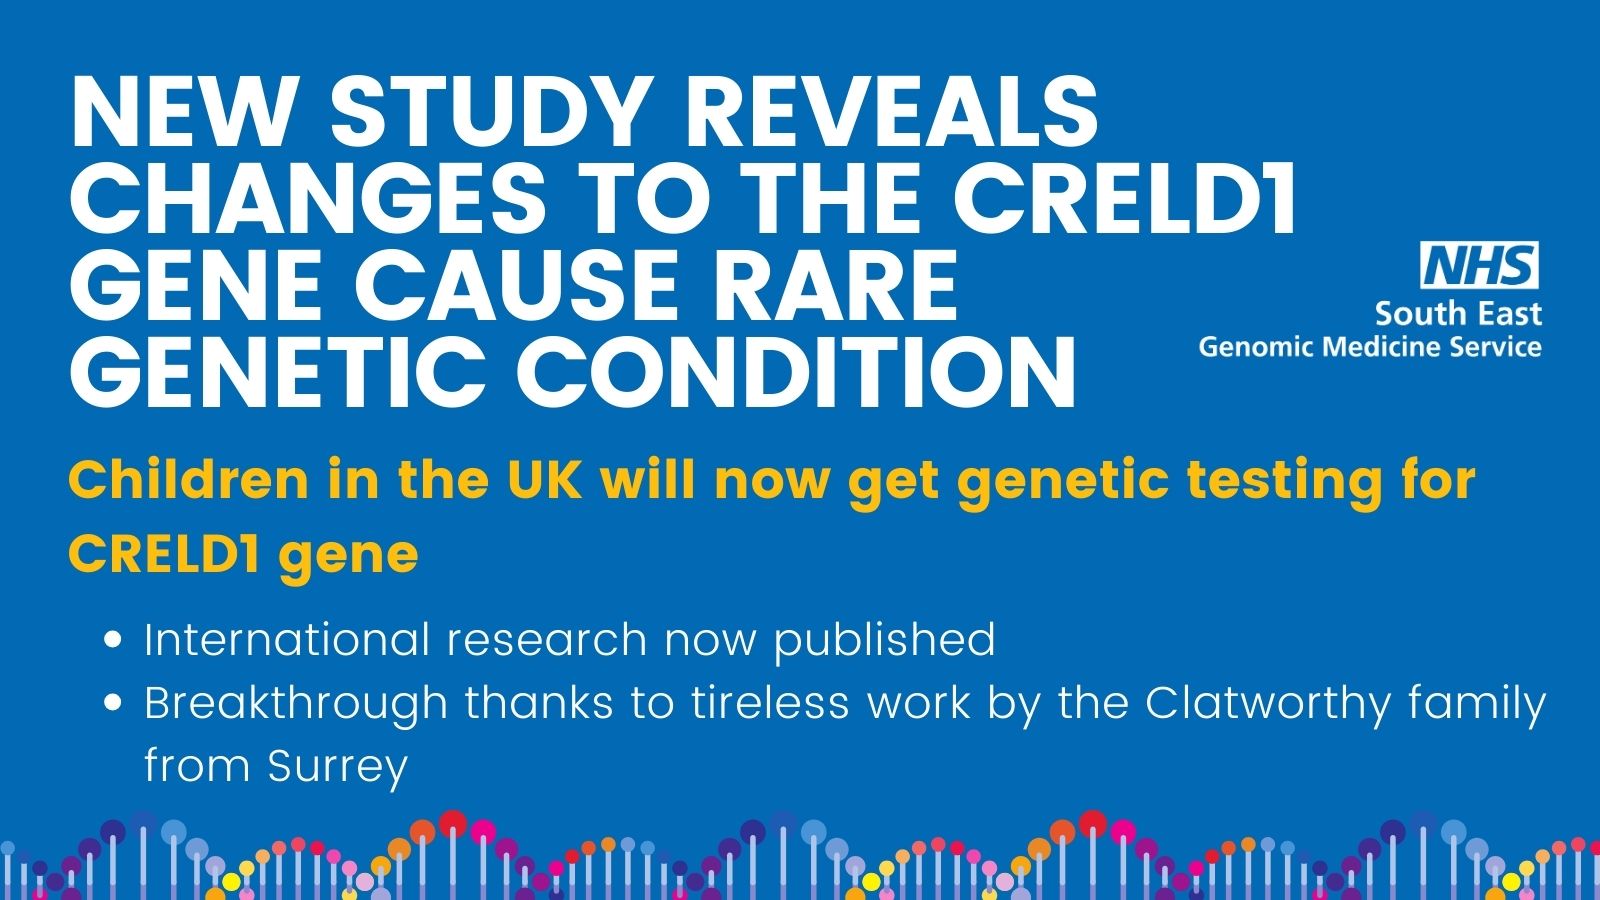 New study reveals changes to the CRELD1 gene cause a rare genetic condition often confused with epilepsy